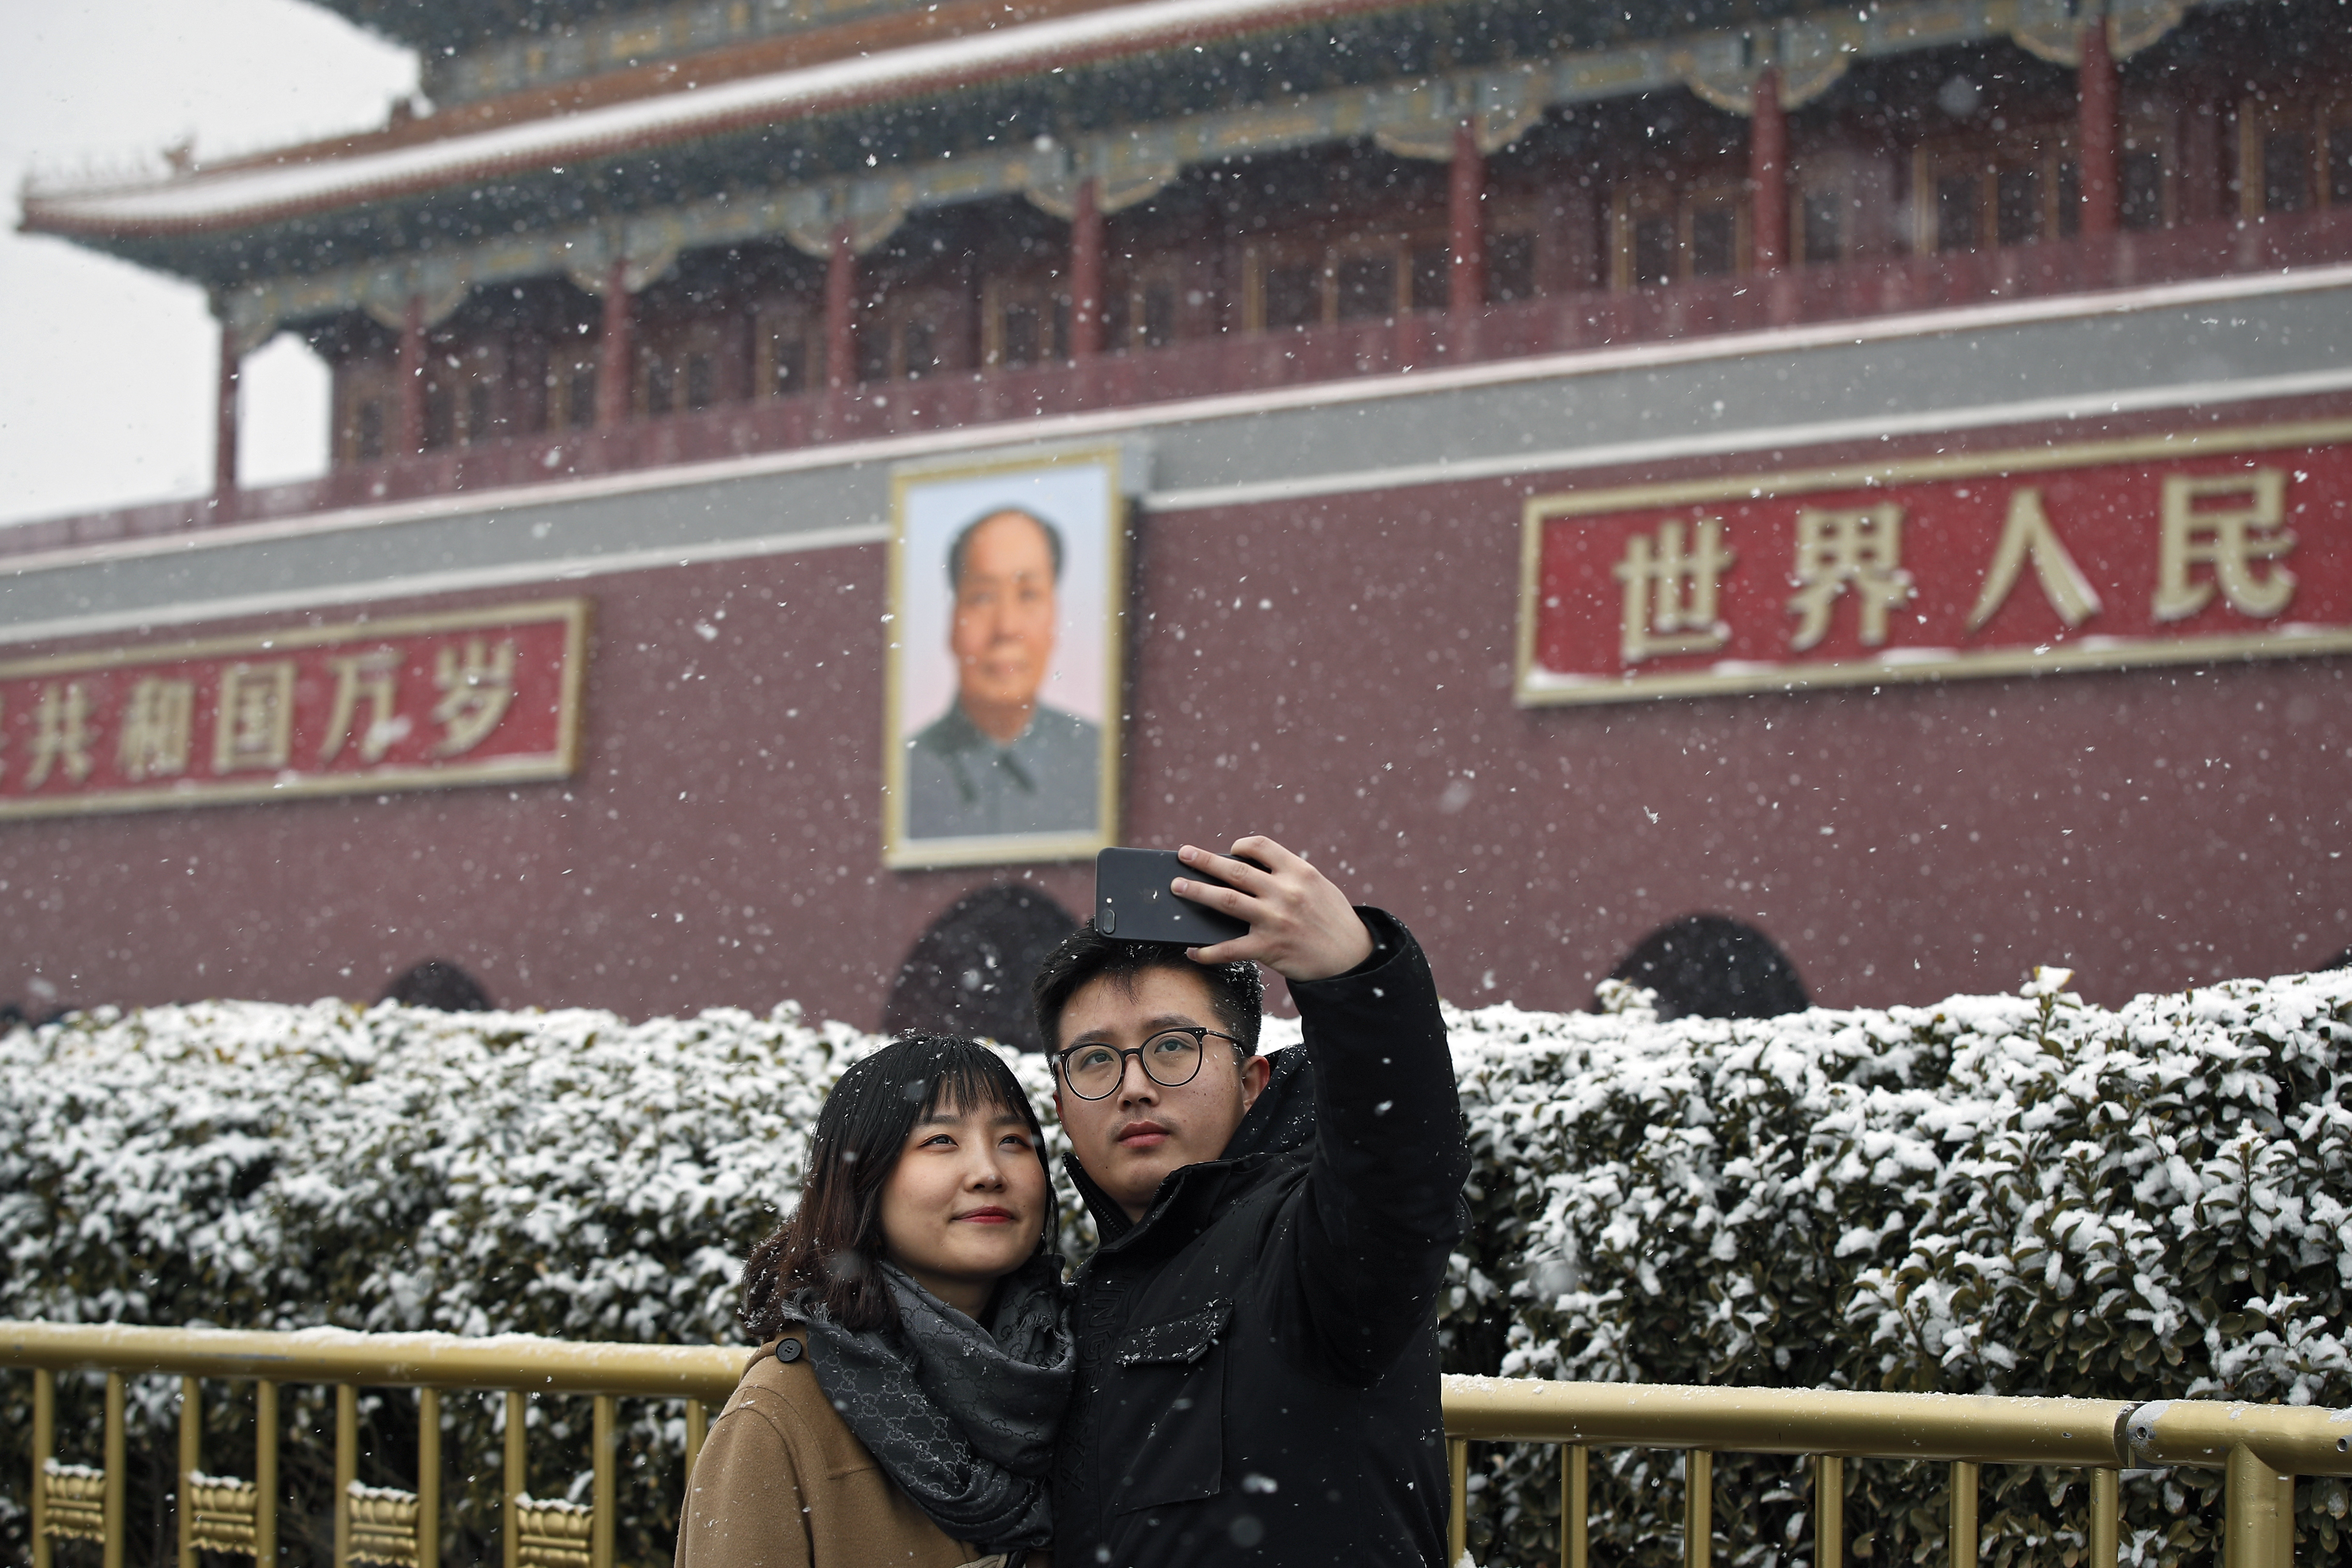 A couple takes a selfie with Tiananmen Gate as snow falls in Beijing, Tuesday, Feb. 12, 2019. China's capital is mostly dry in the winter but a storm system brought snow to the city on Tuesday morning. (AP Photo/Andy Wong)